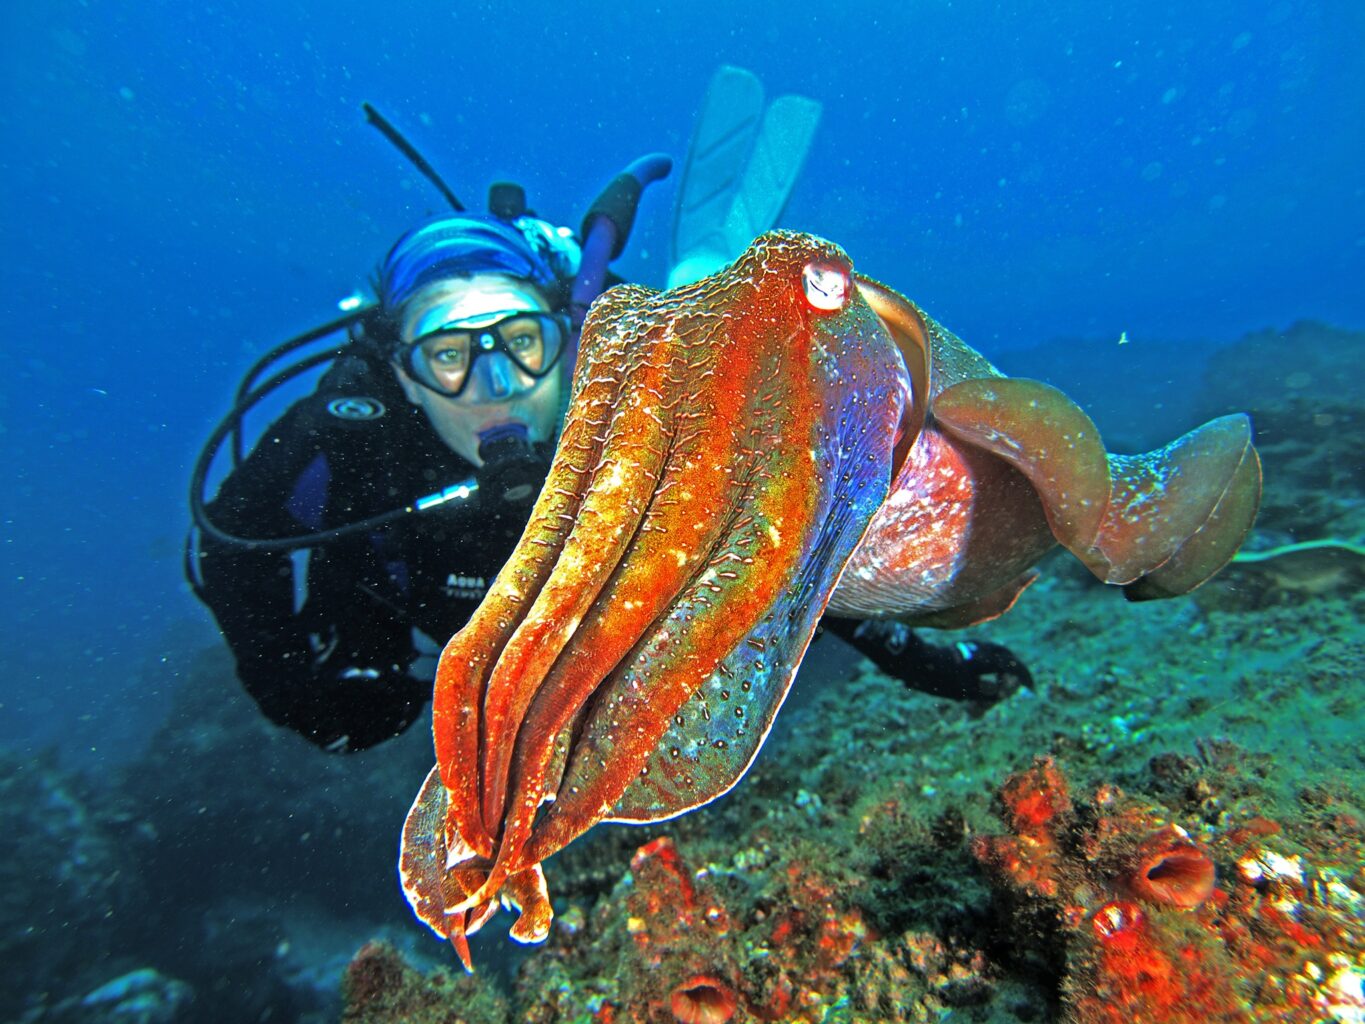 The Giant Cuttlefish Is One Of The Largest Cuttlefish On Earth